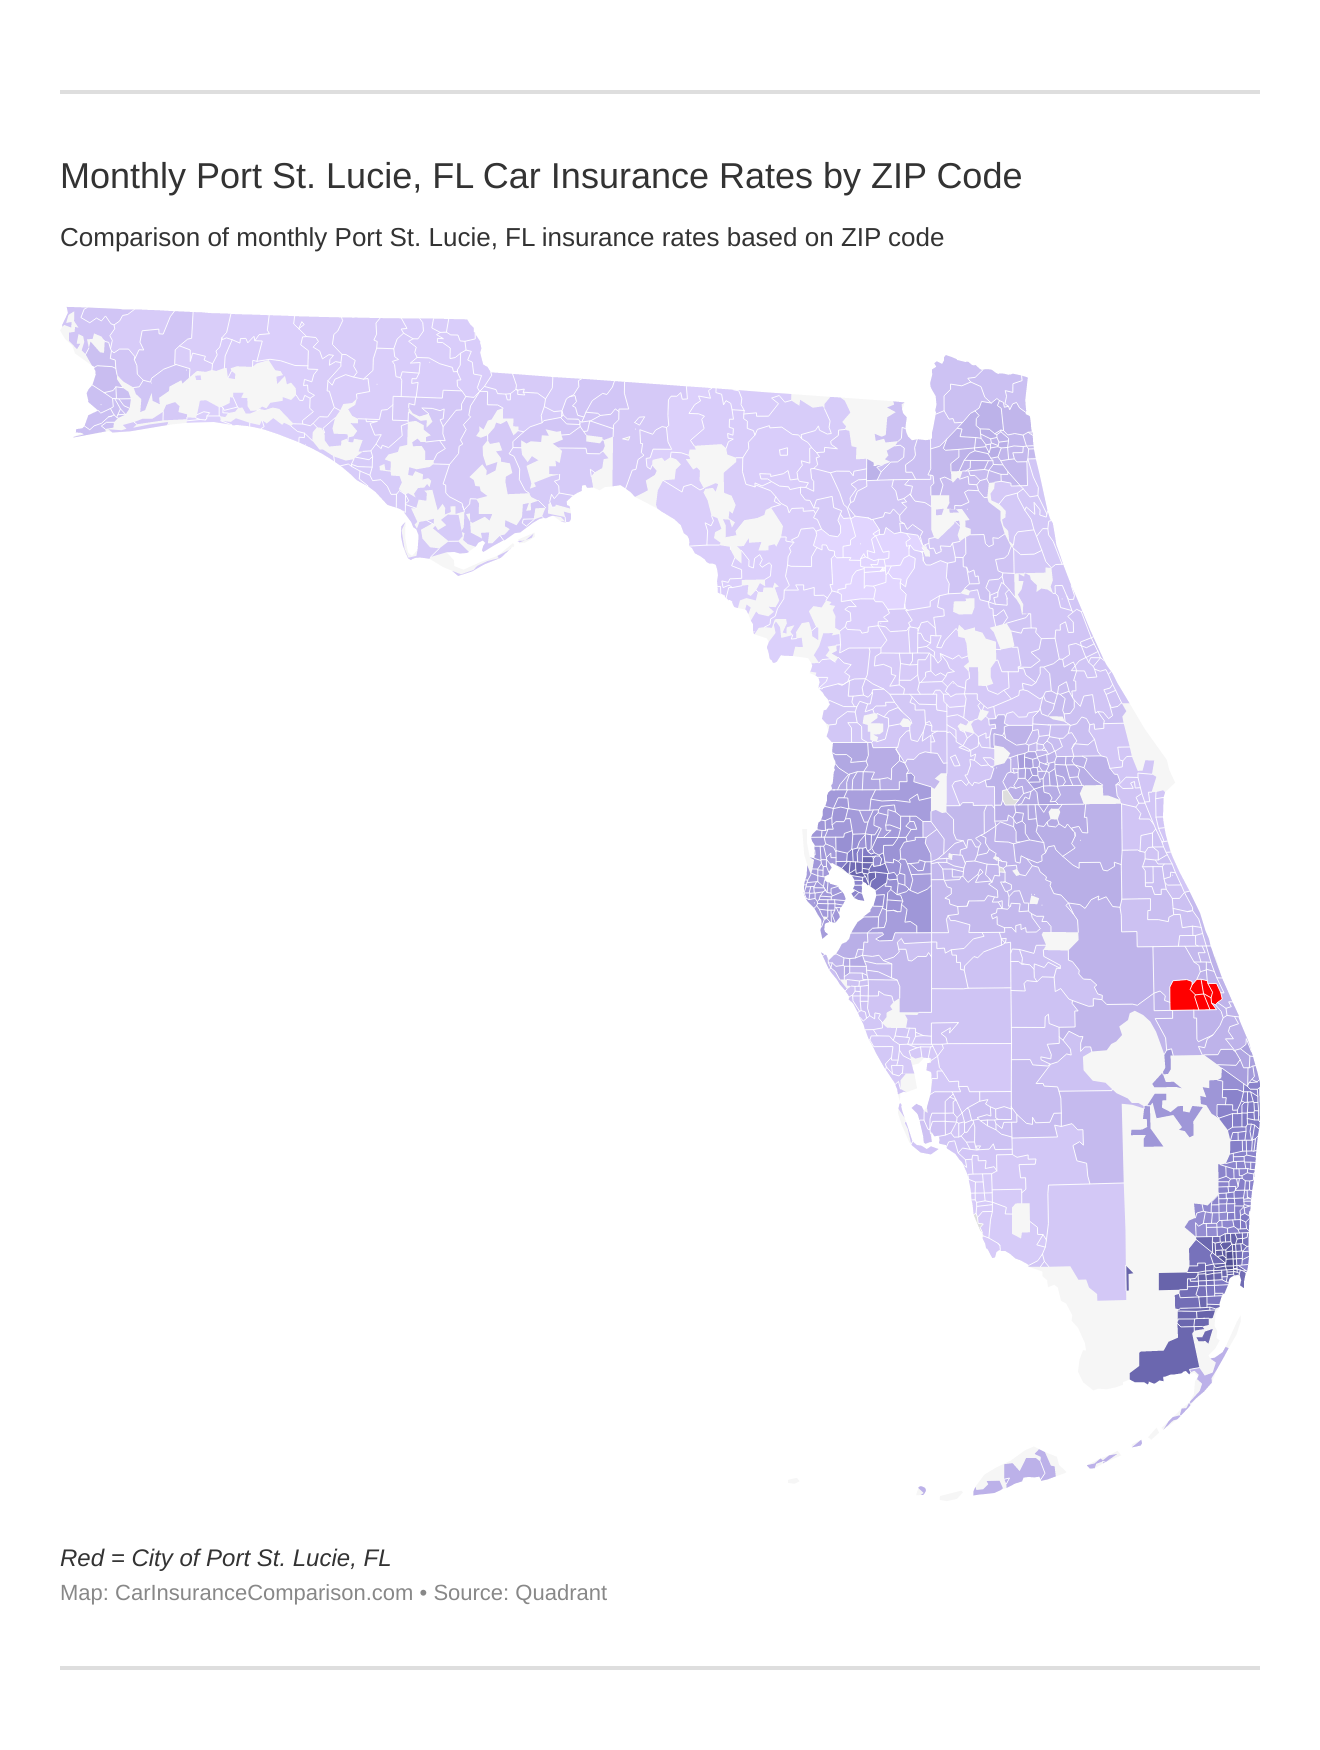 Monthly Port St. Lucie, FL Car Insurance Rates by ZIP Code